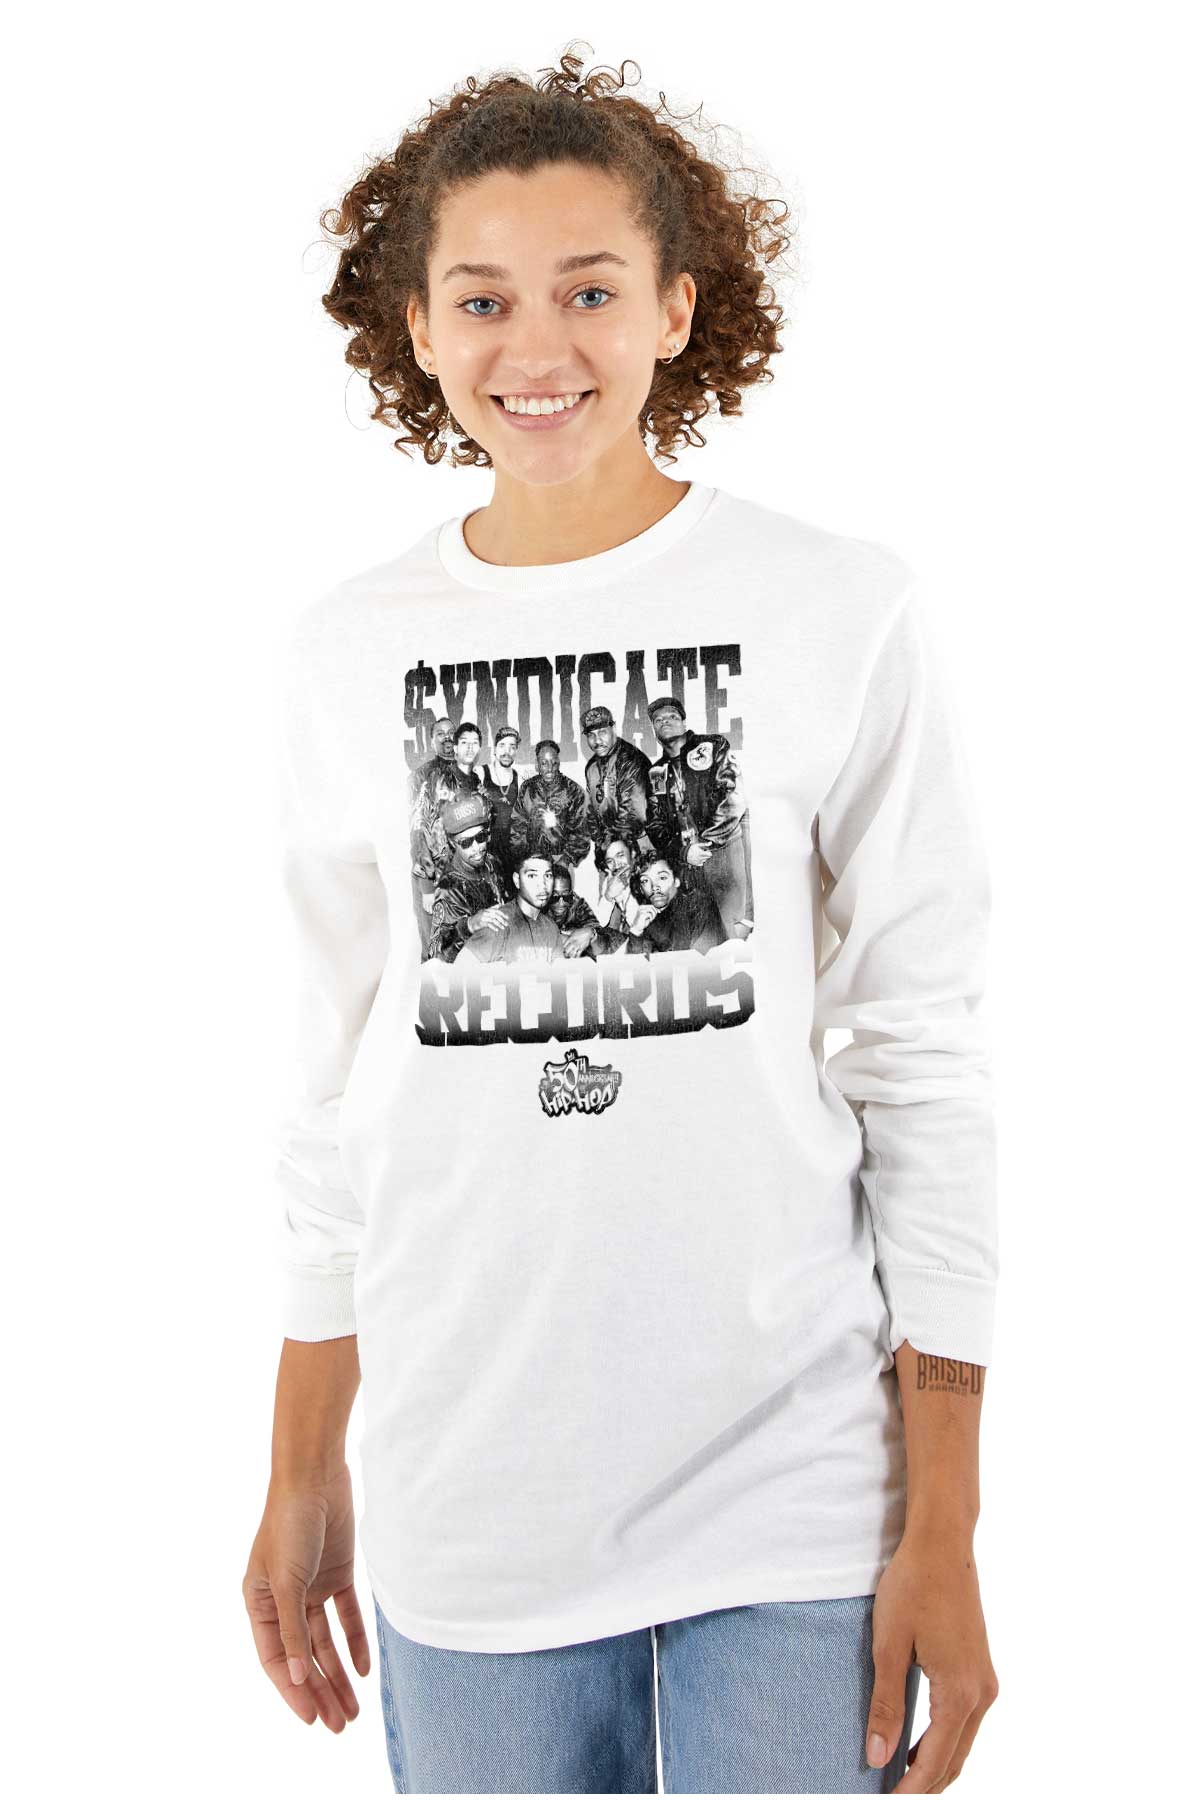 This picture features a black and white shirt with the 50th anniversary logo of Hip Hop, honoring its pioneers and the spirit of the culture.